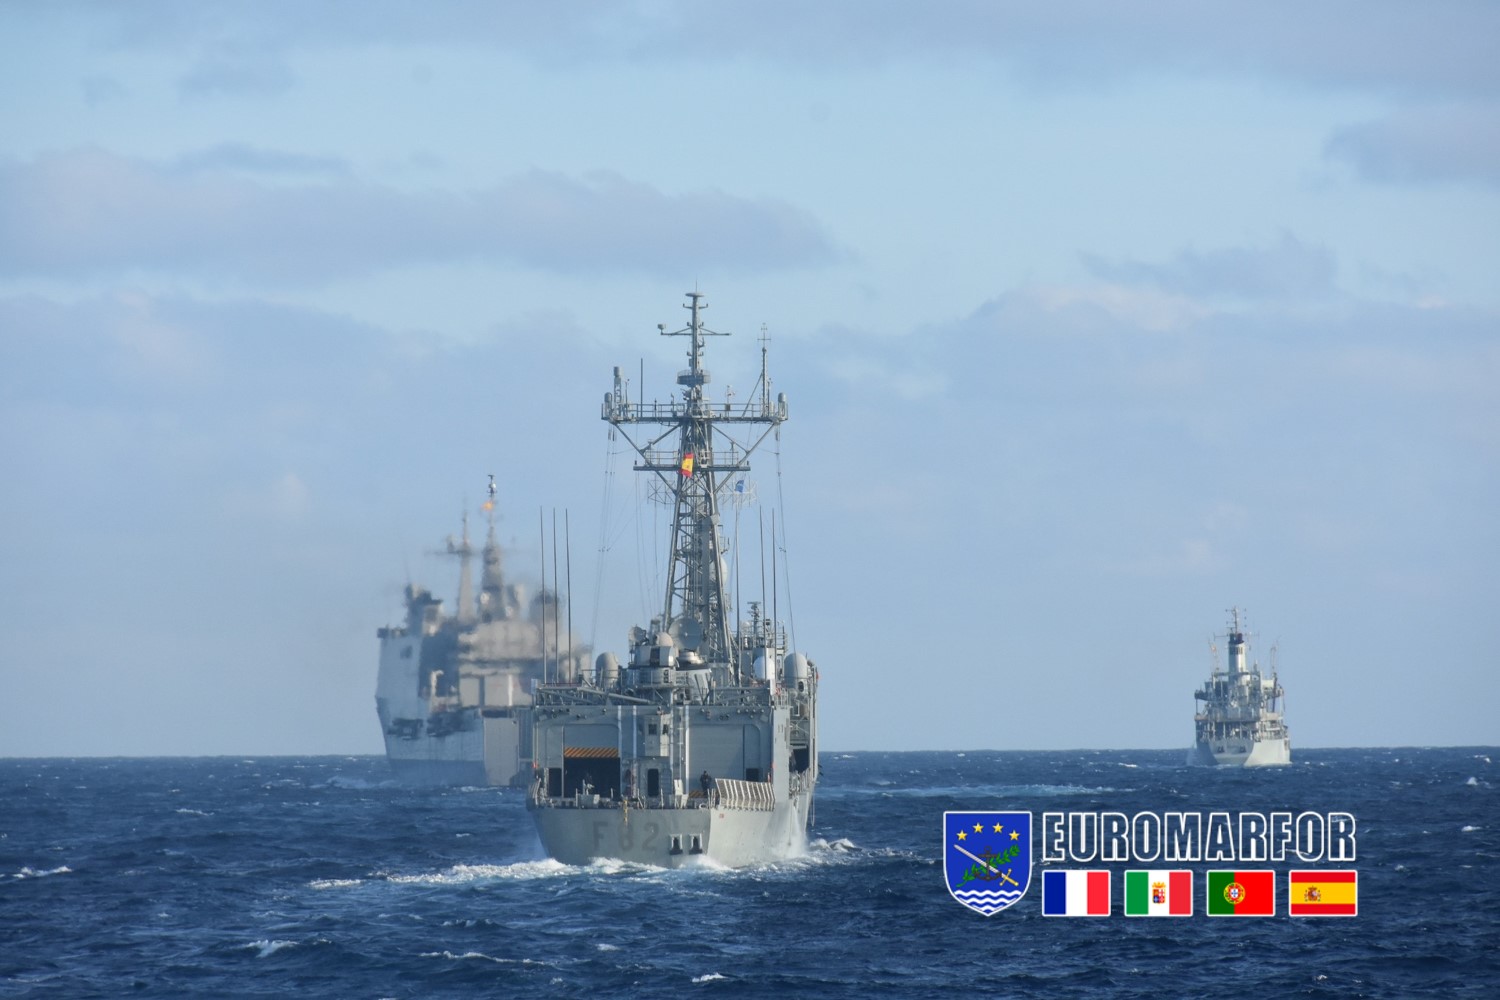 Moroccan navy fosters partnership with Euromarfor